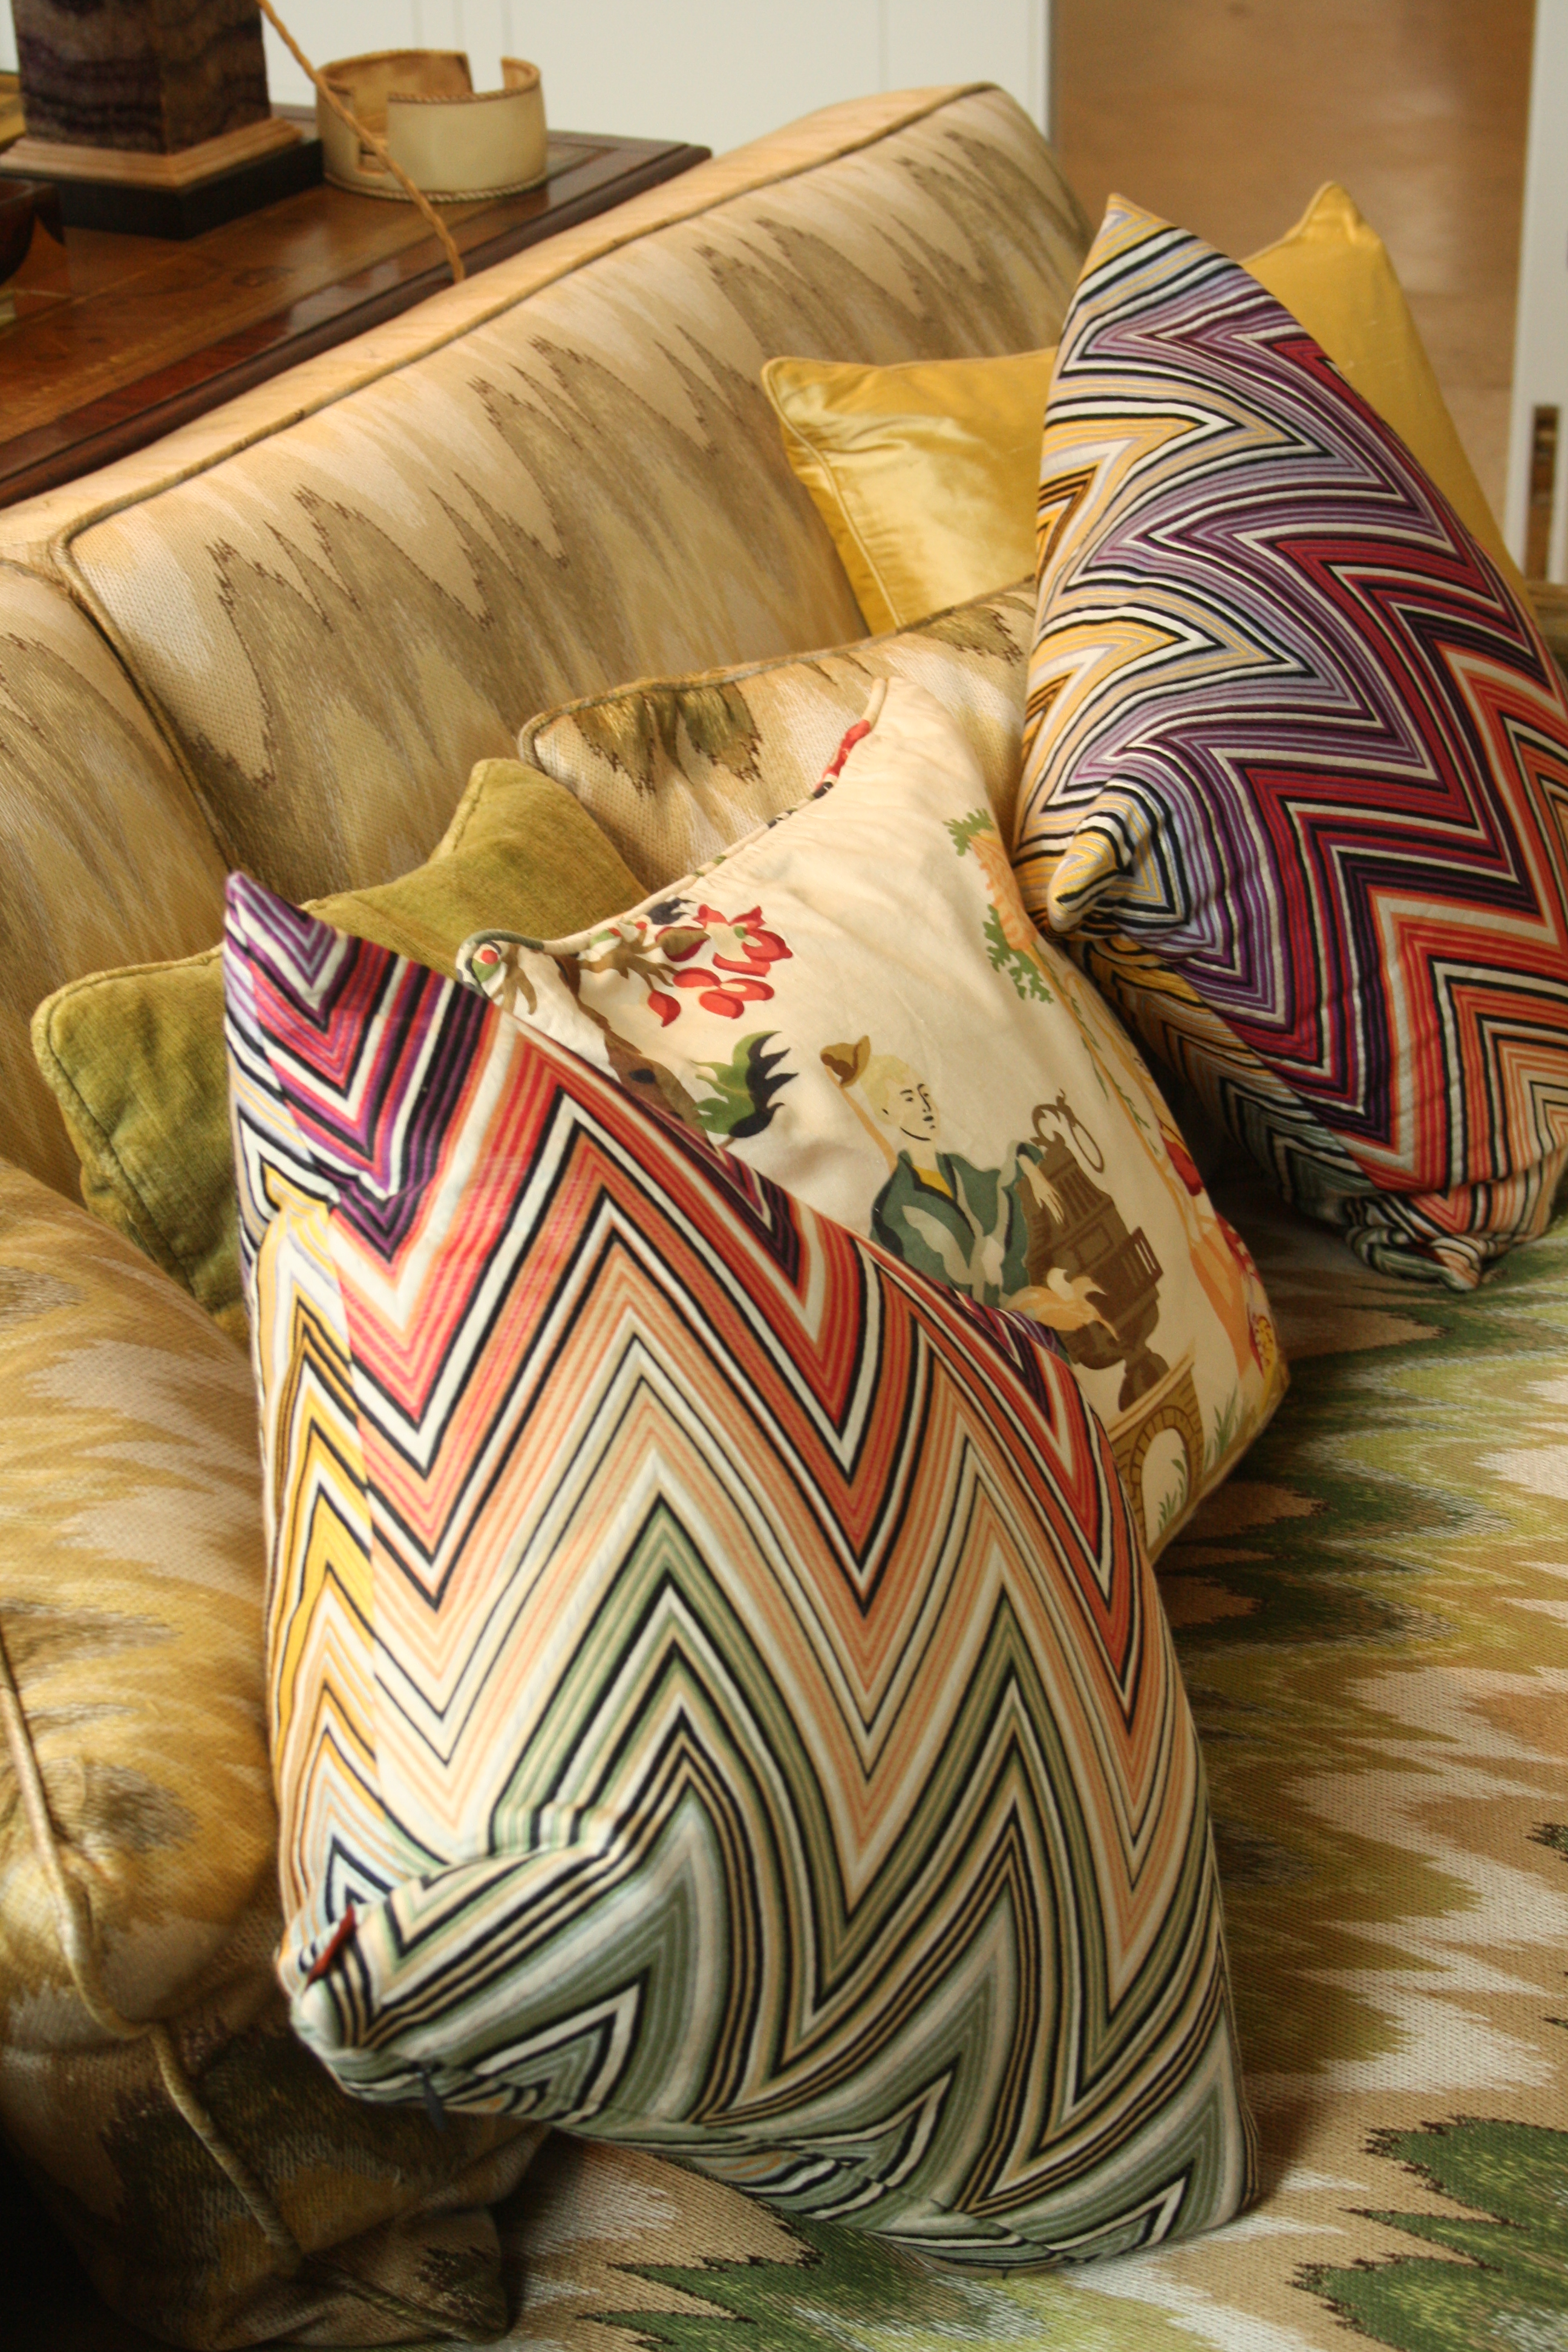 Missoni cushions sit with traditional Chinoiserie and Flame Stitch fabrics